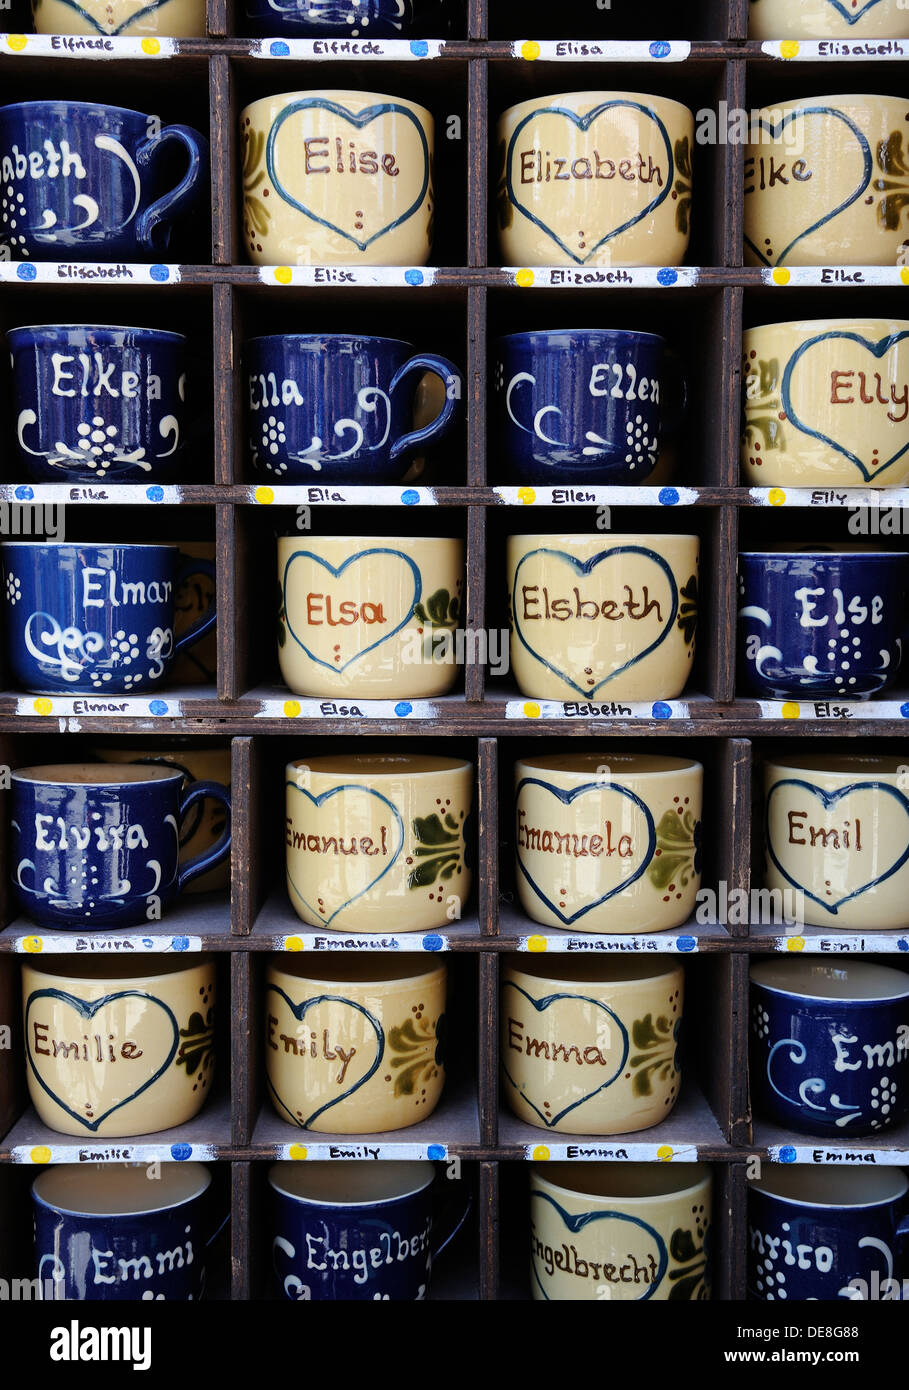 Germany, Bavaria, Munich, Names written on Cups in Auer Dult market Stock Photo